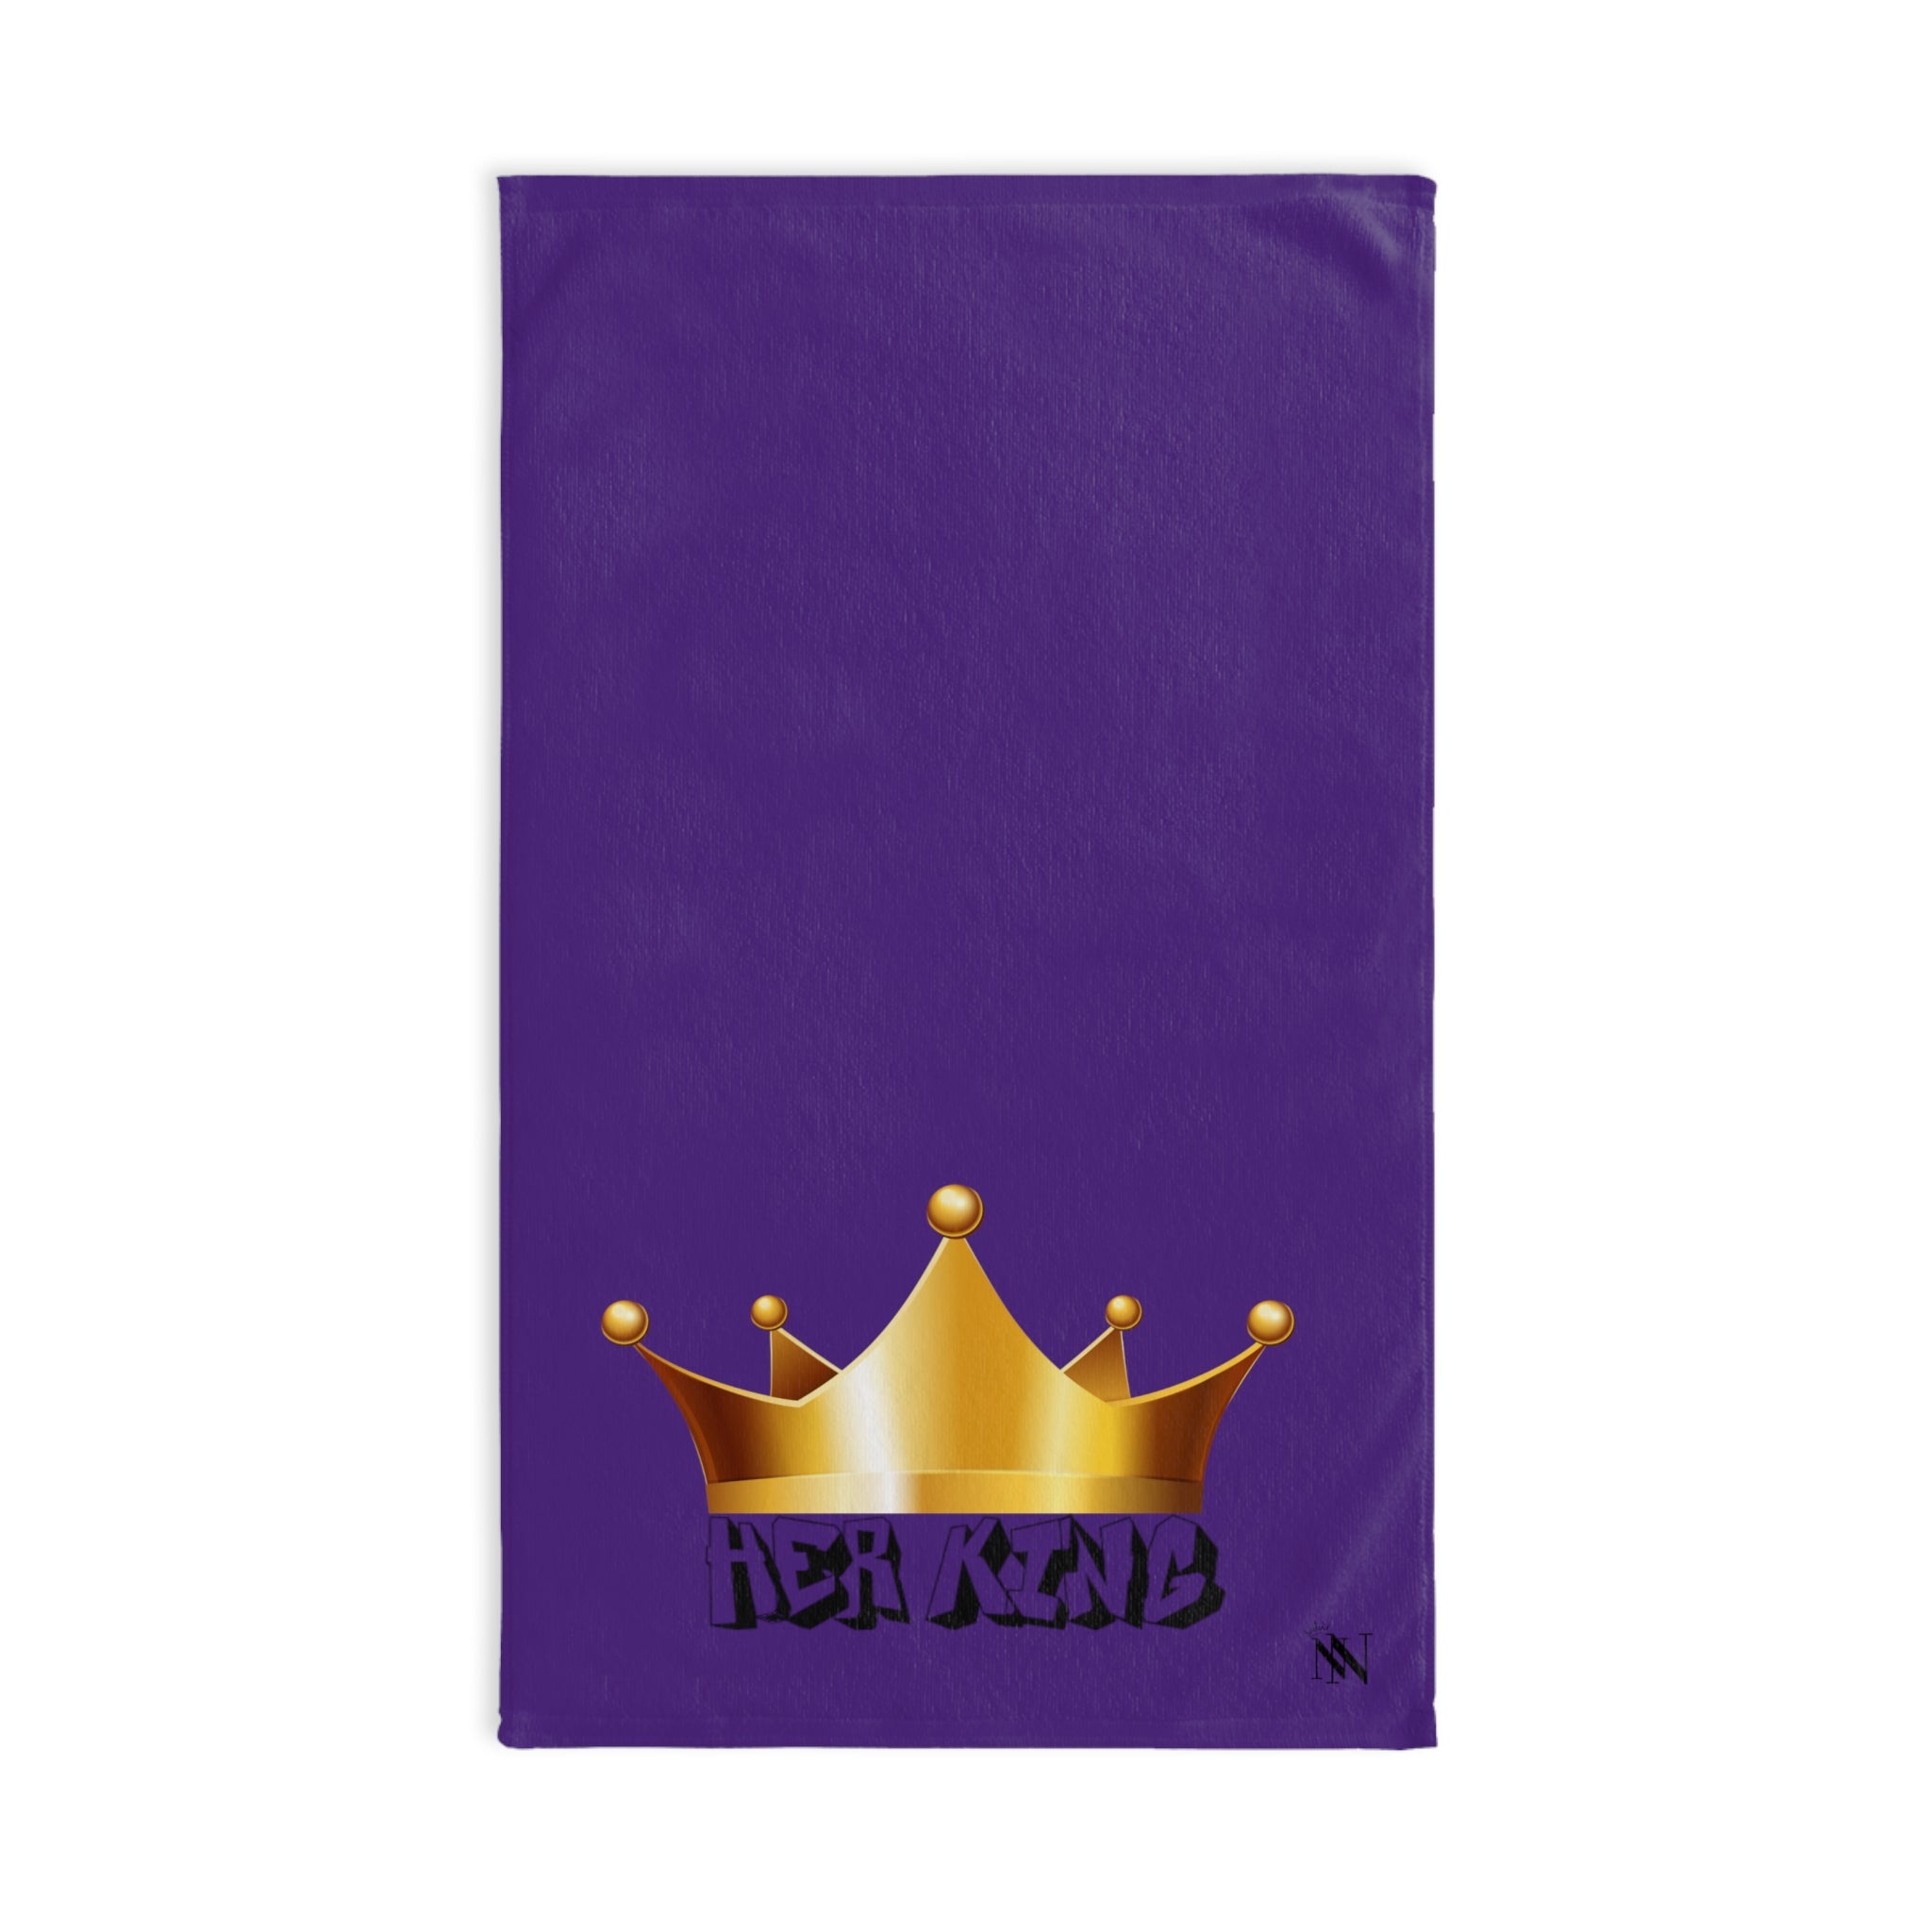 Gold Her King Purple | Funny Gifts for Men - Gifts for Him - Birthday Gifts for Men, Him, Husband, Boyfriend, New Couple Gifts, Fathers & Valentines Day Gifts, Christmas Gifts NECTAR NAPKINS